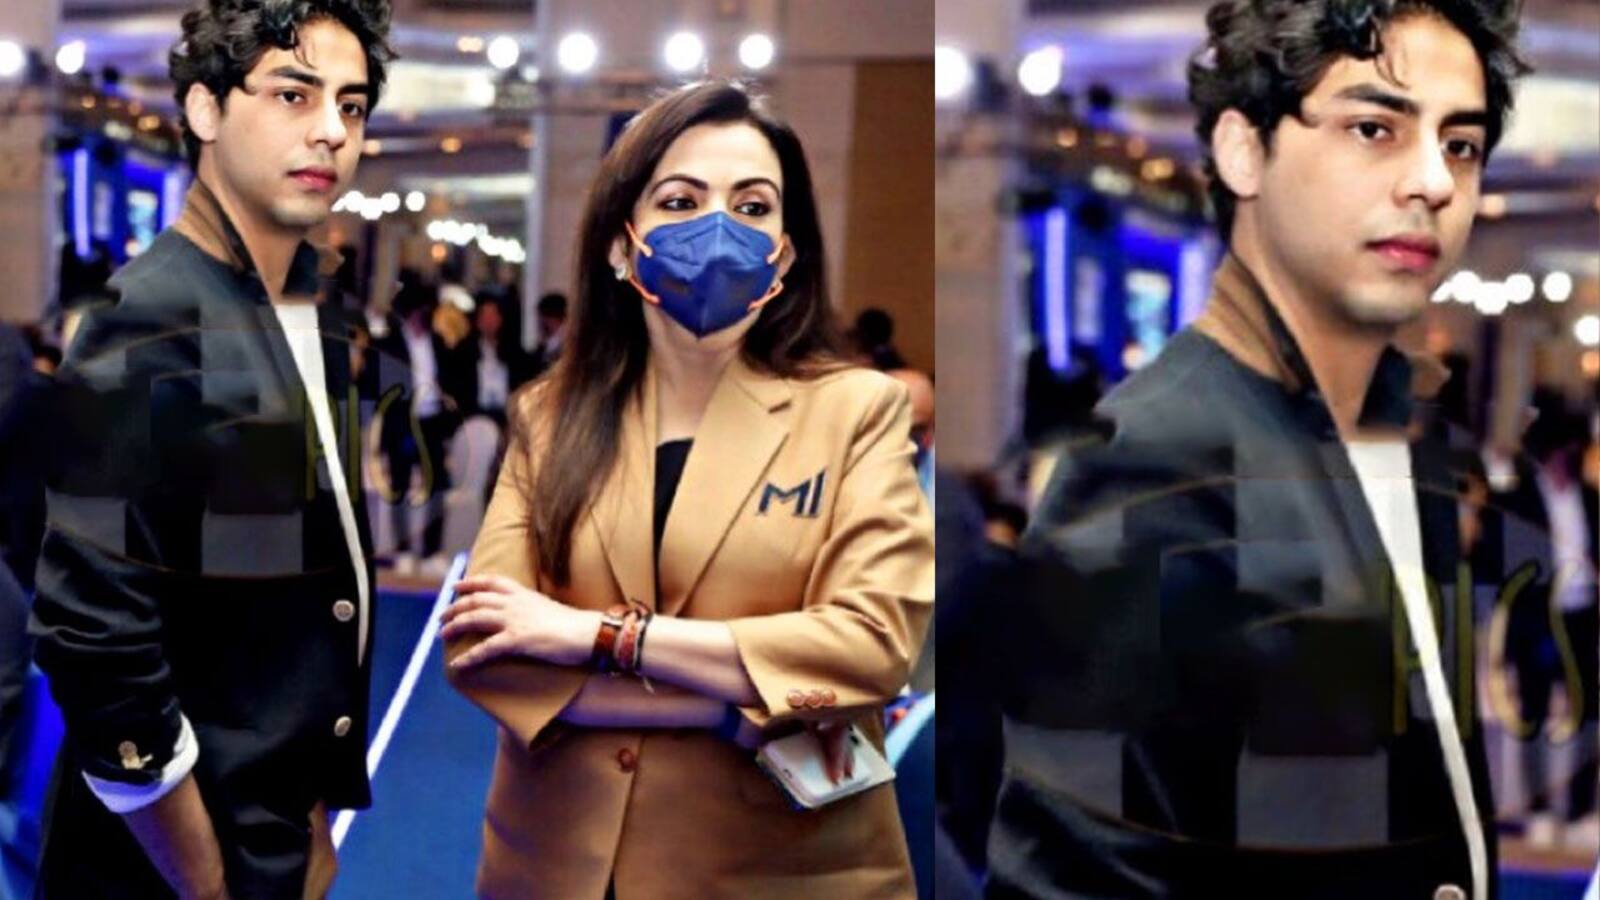 IPL 2022 Auction: Aryan Khan's pictures engrossed in a chat with Nita Ambani  are going VIRAL